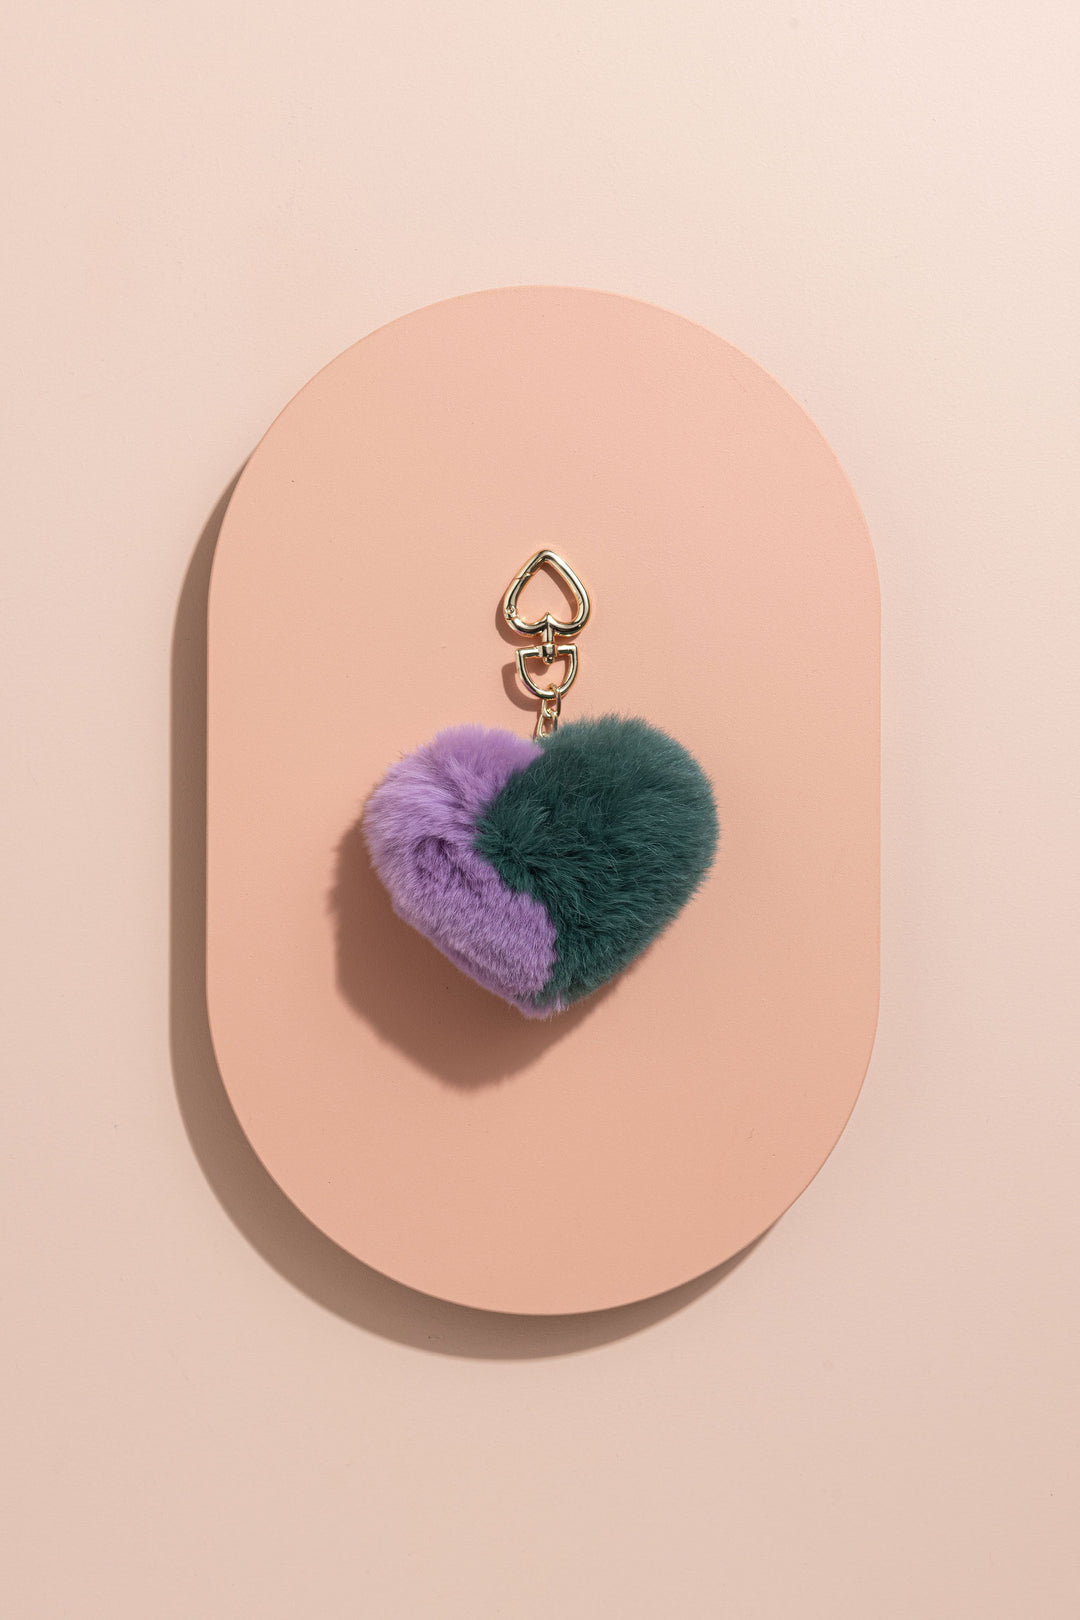 POM POM ACCESSORY - EMERALD GREEN & LAVENDER LOVE HEART - CrateExpectations